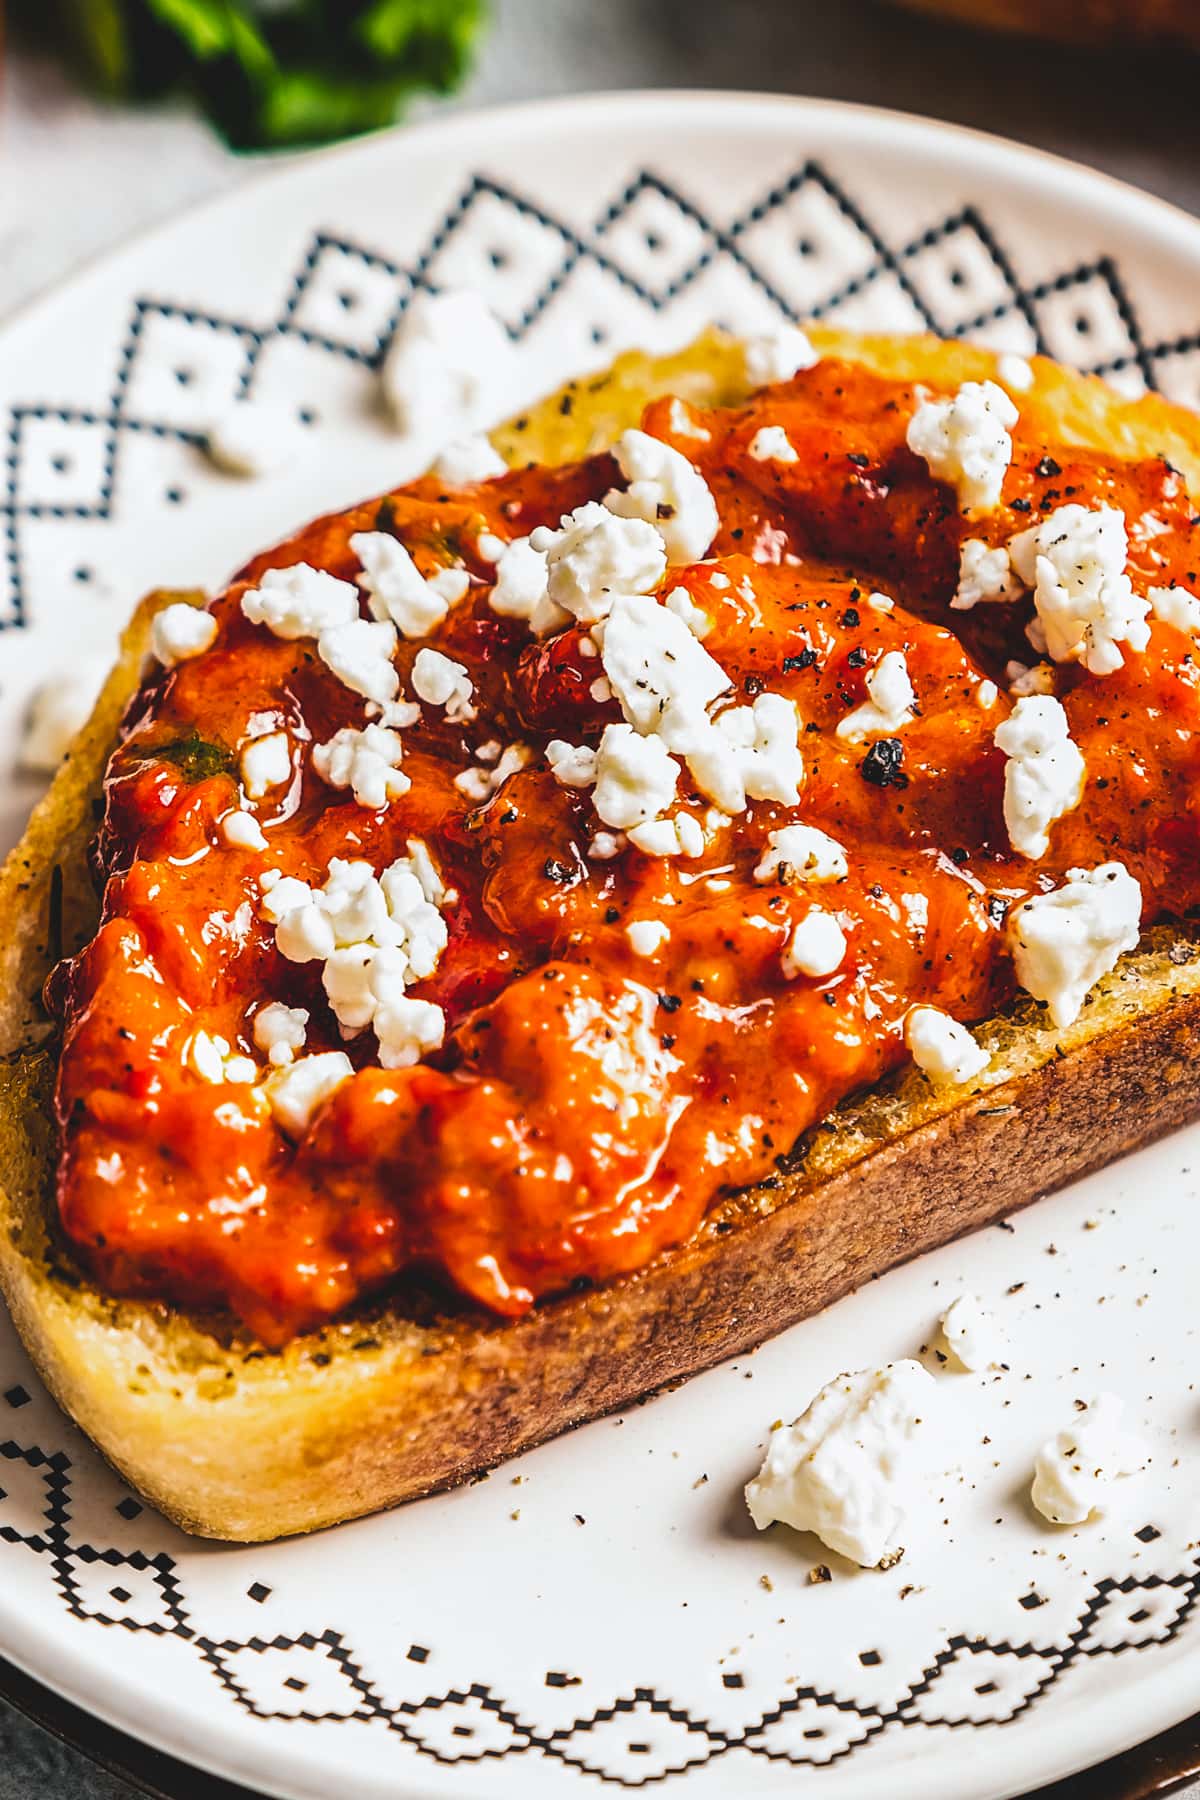 Red pepper relish spread over a piece of toasted bread, topped with crumbled feta, and served on a plate.